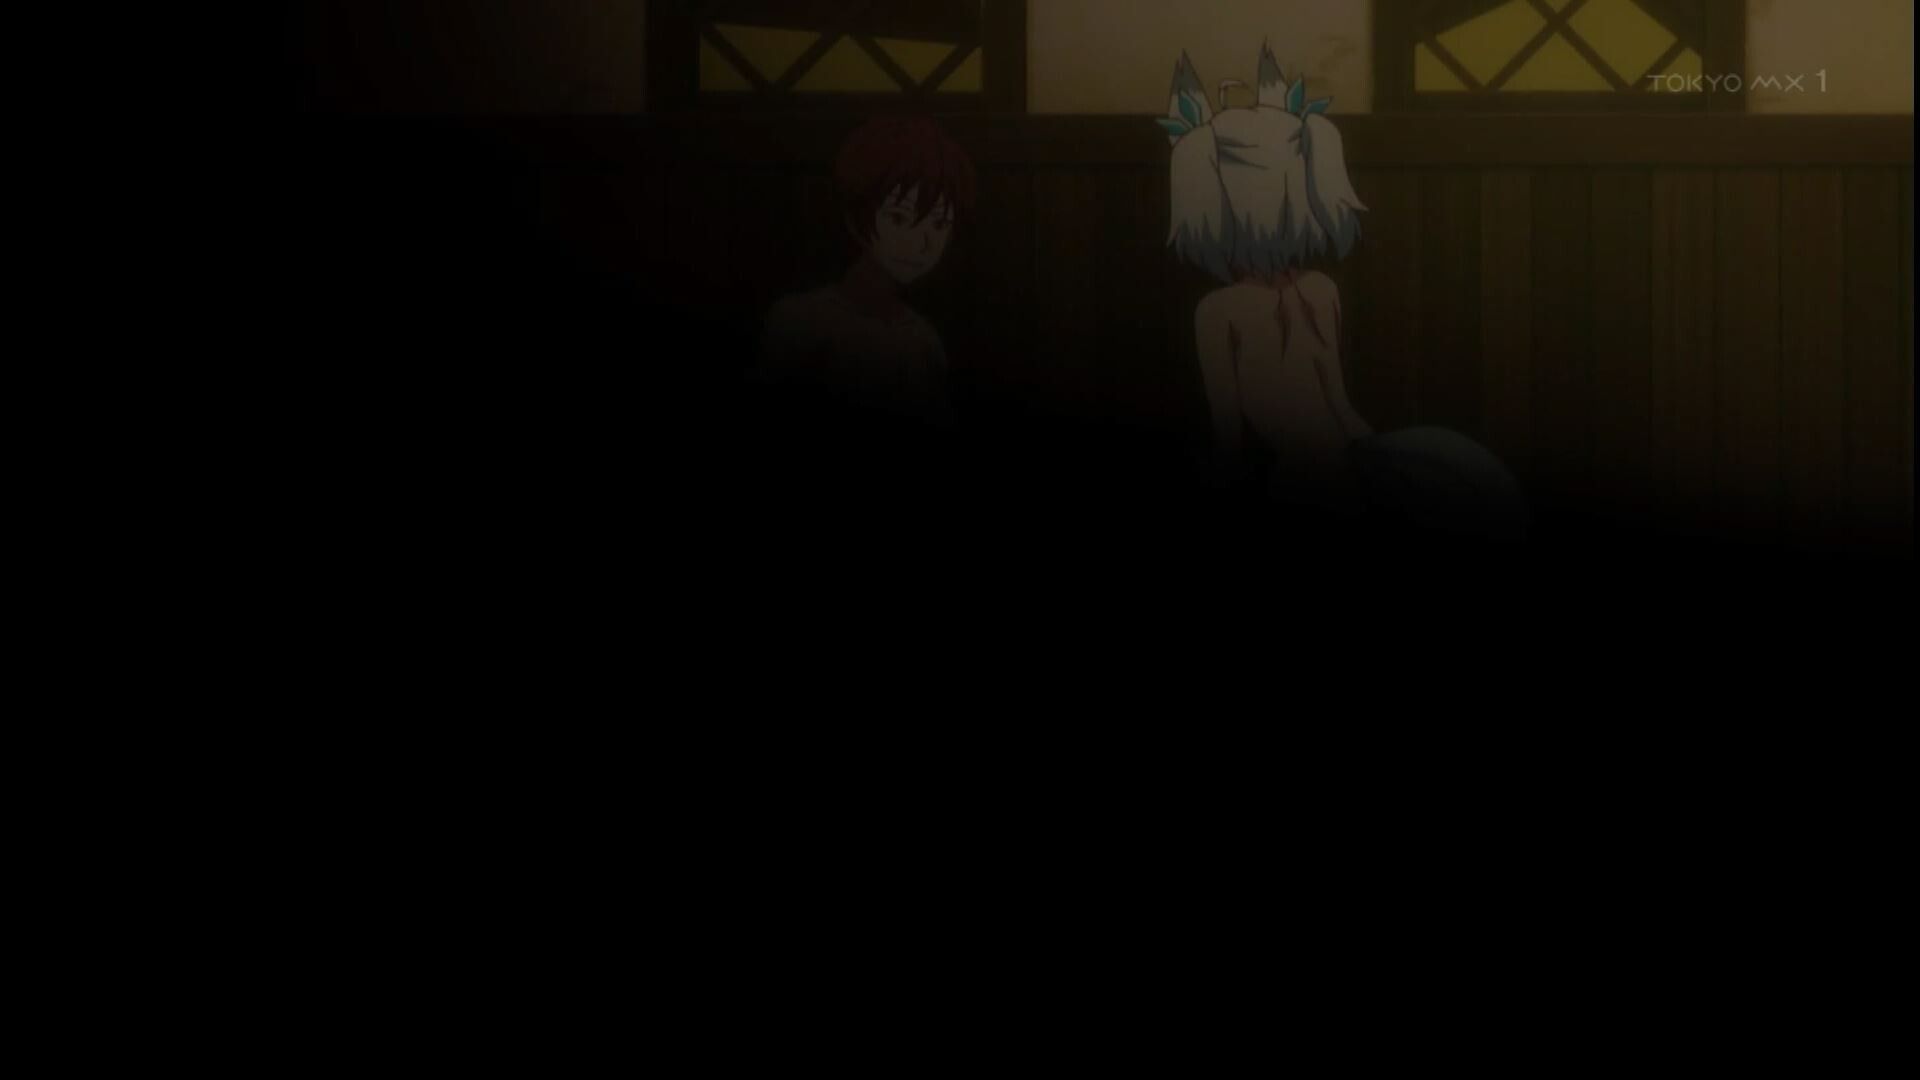 The scene where she masturbates in front of a girl in the anime "Recovery Technician's Redo" 9 stories 10